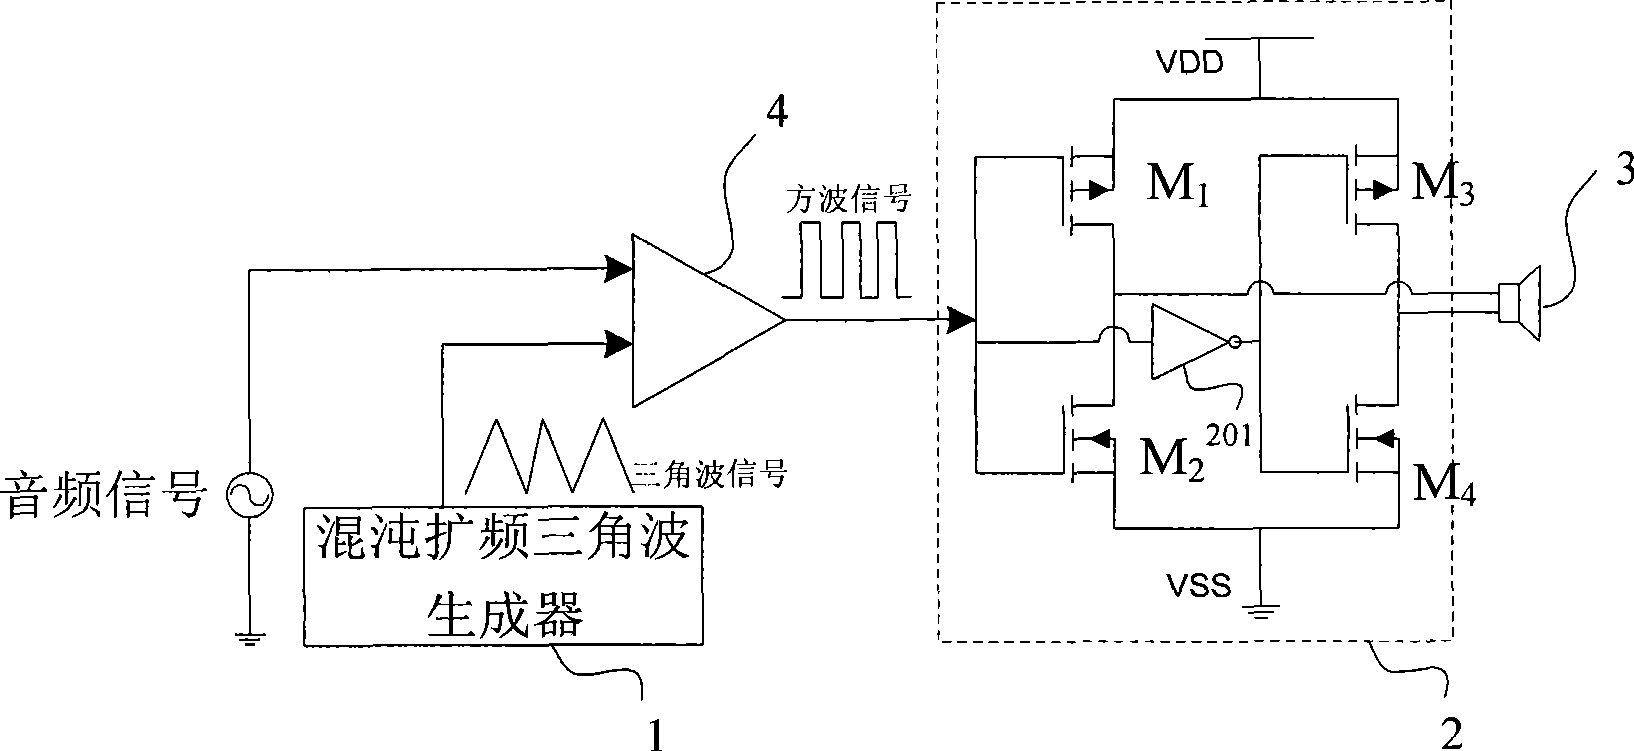 Non-filter D type audio amplifier based on chaotic spread-spectrum modulation technique